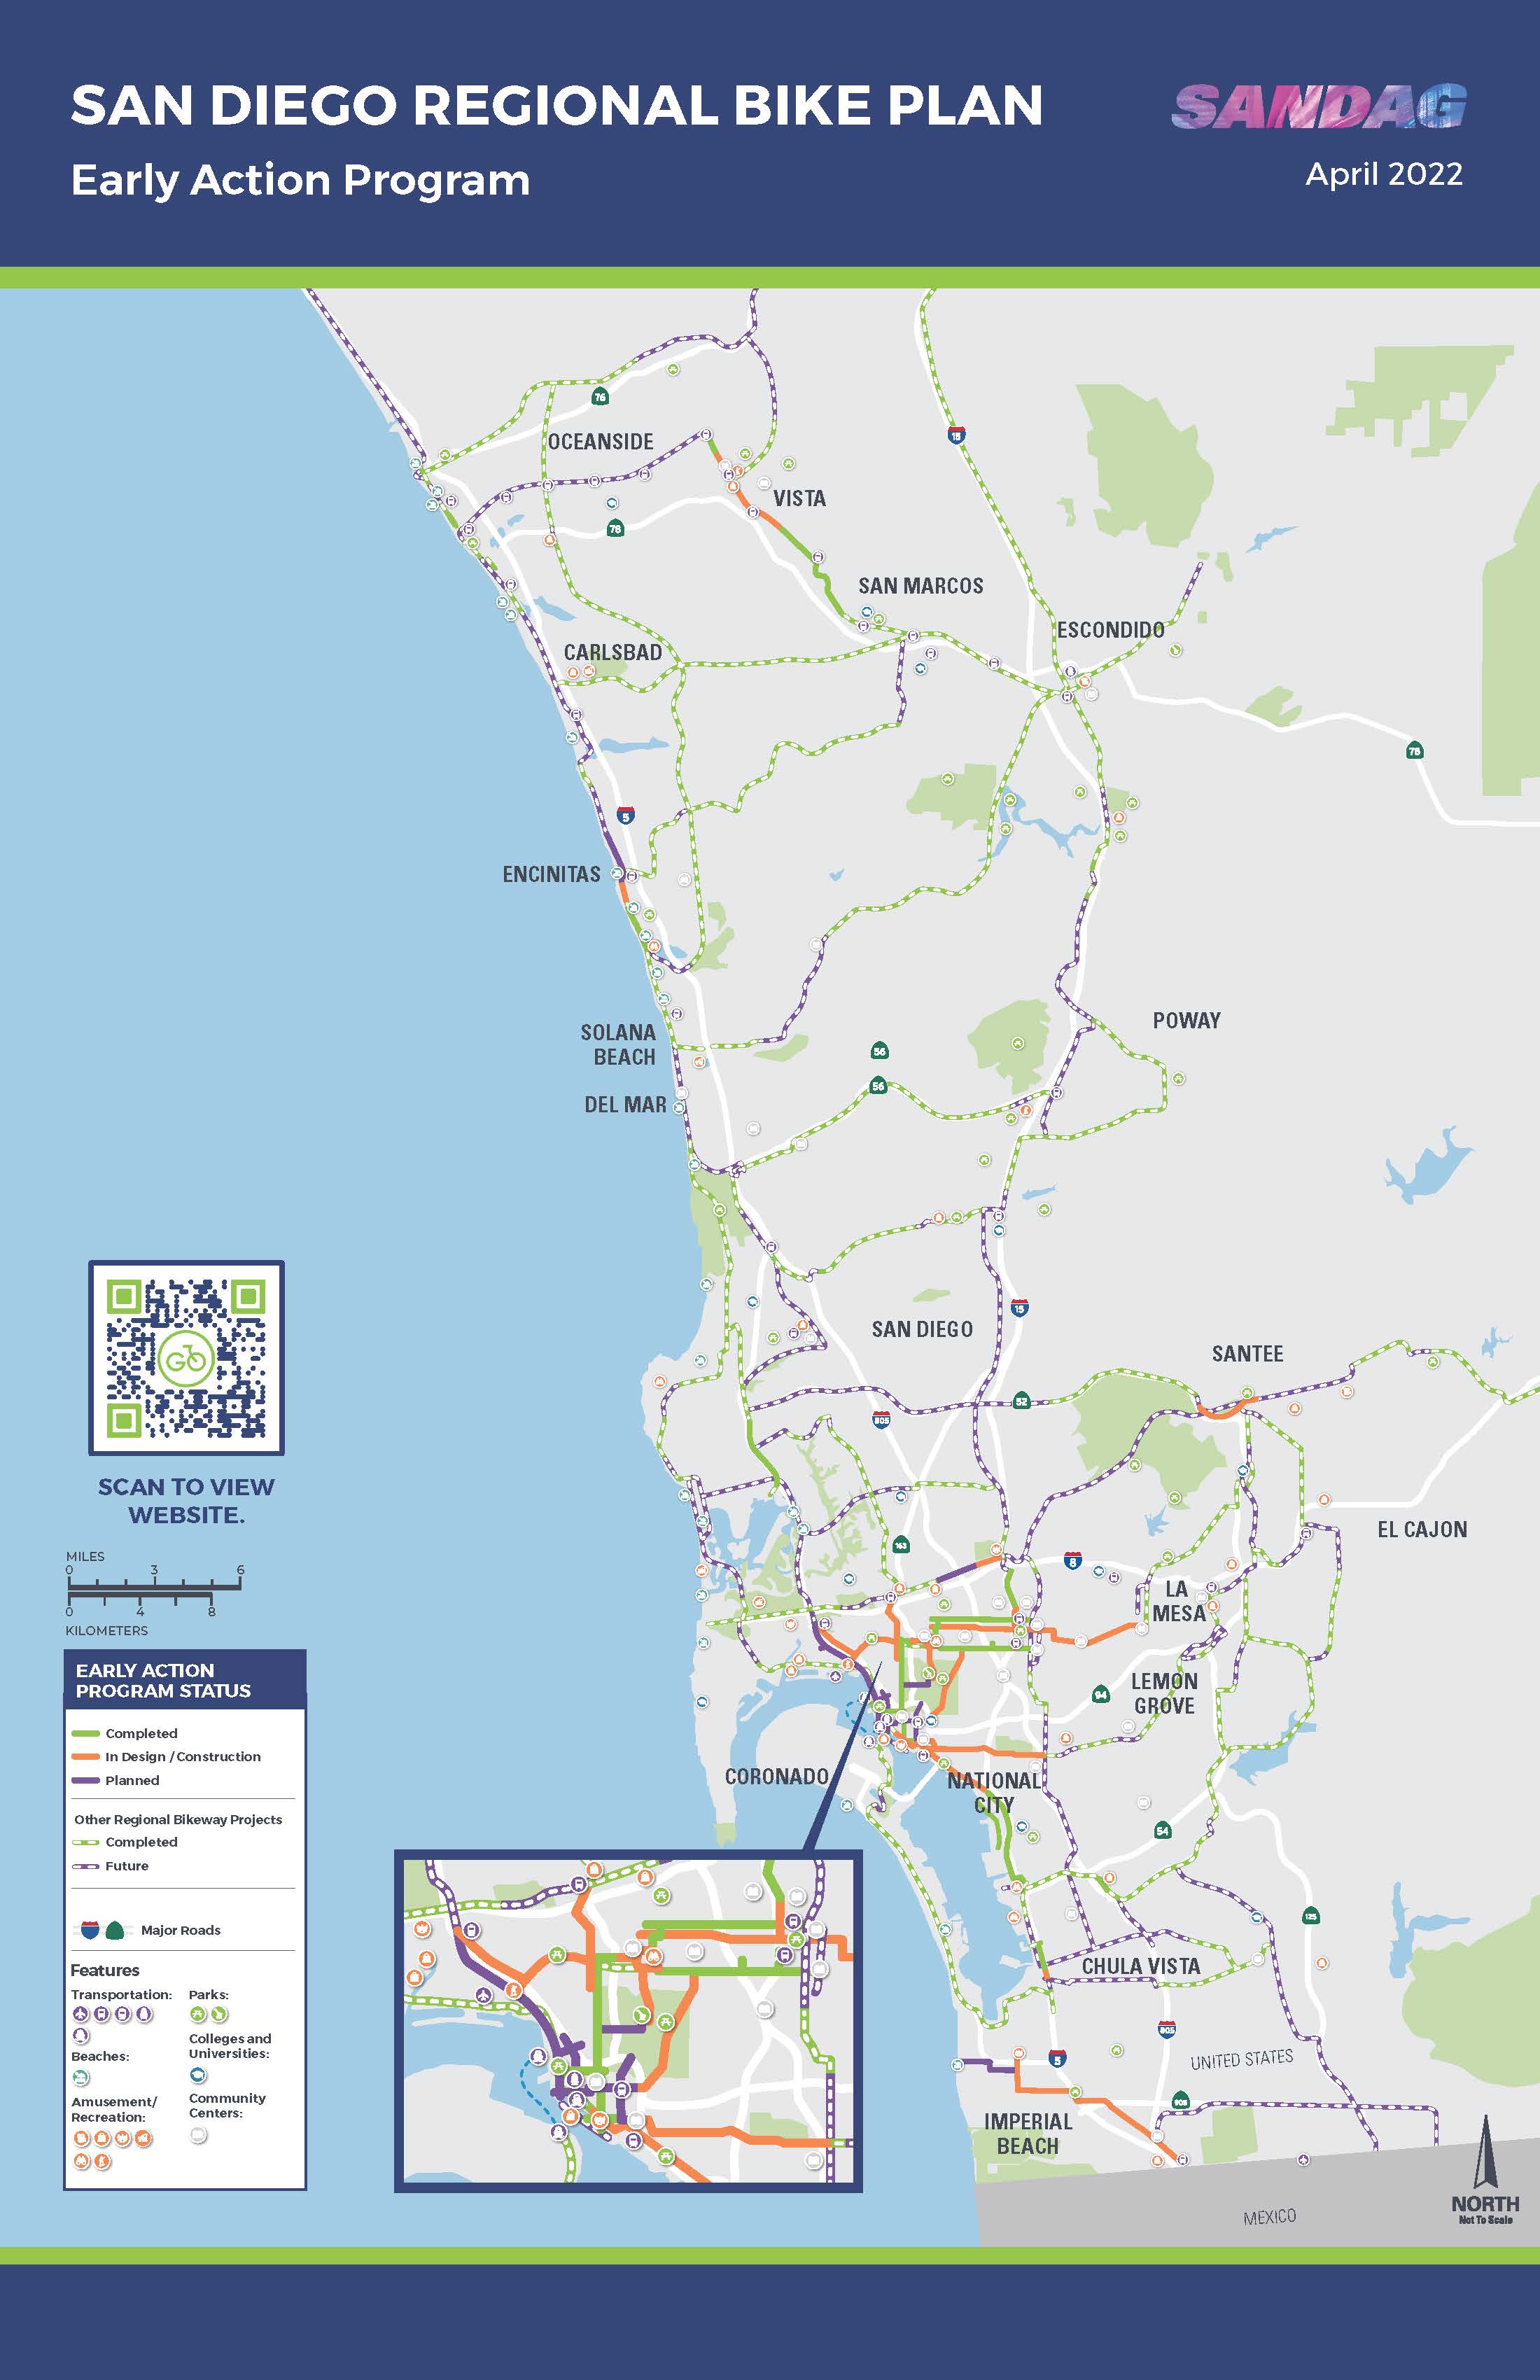 View the San Diego Regional Bike Plan Early Action Program map.